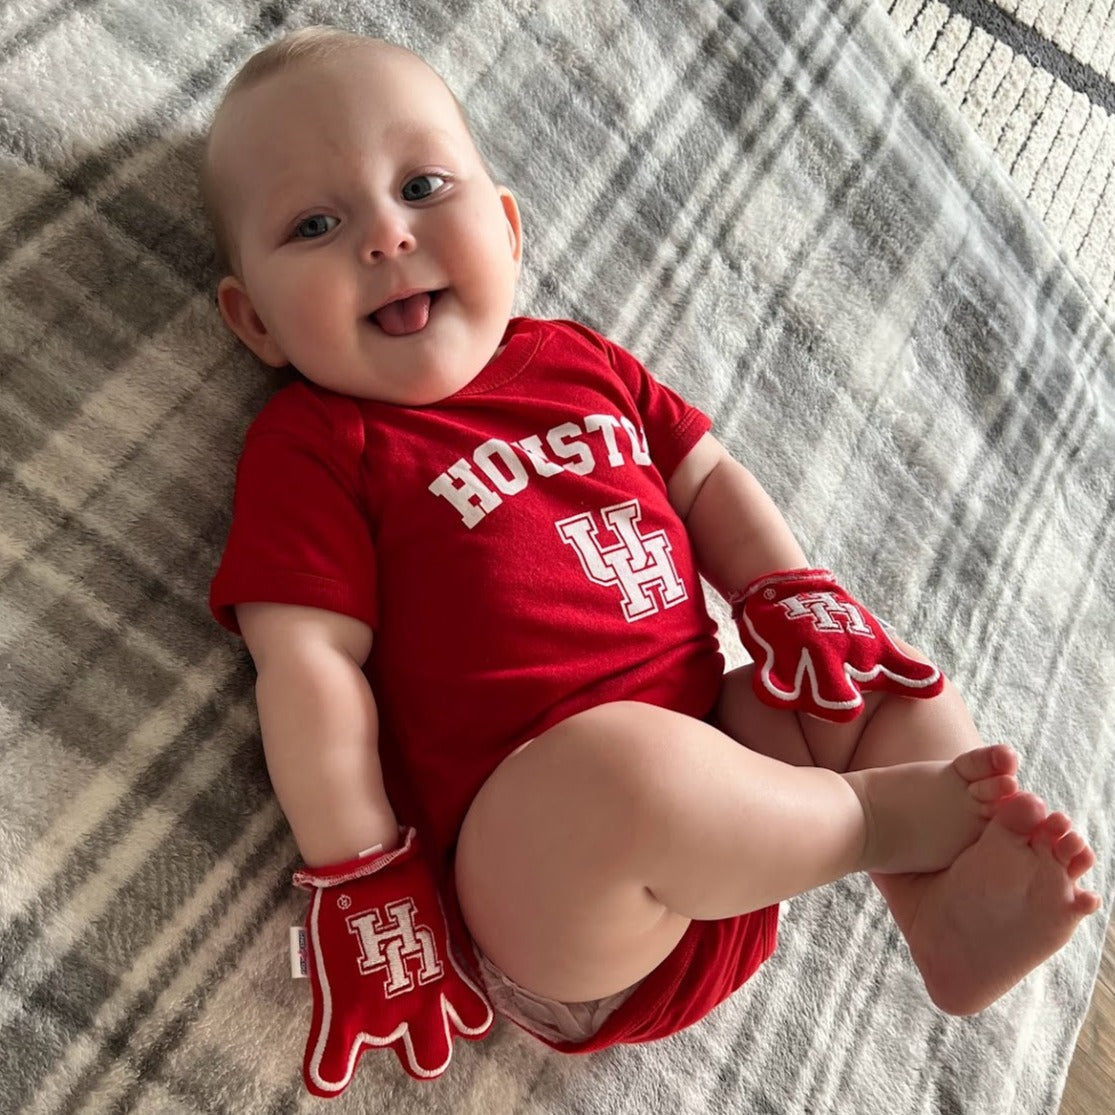 Infant wearing Houston Go Coogs baby mittens in red